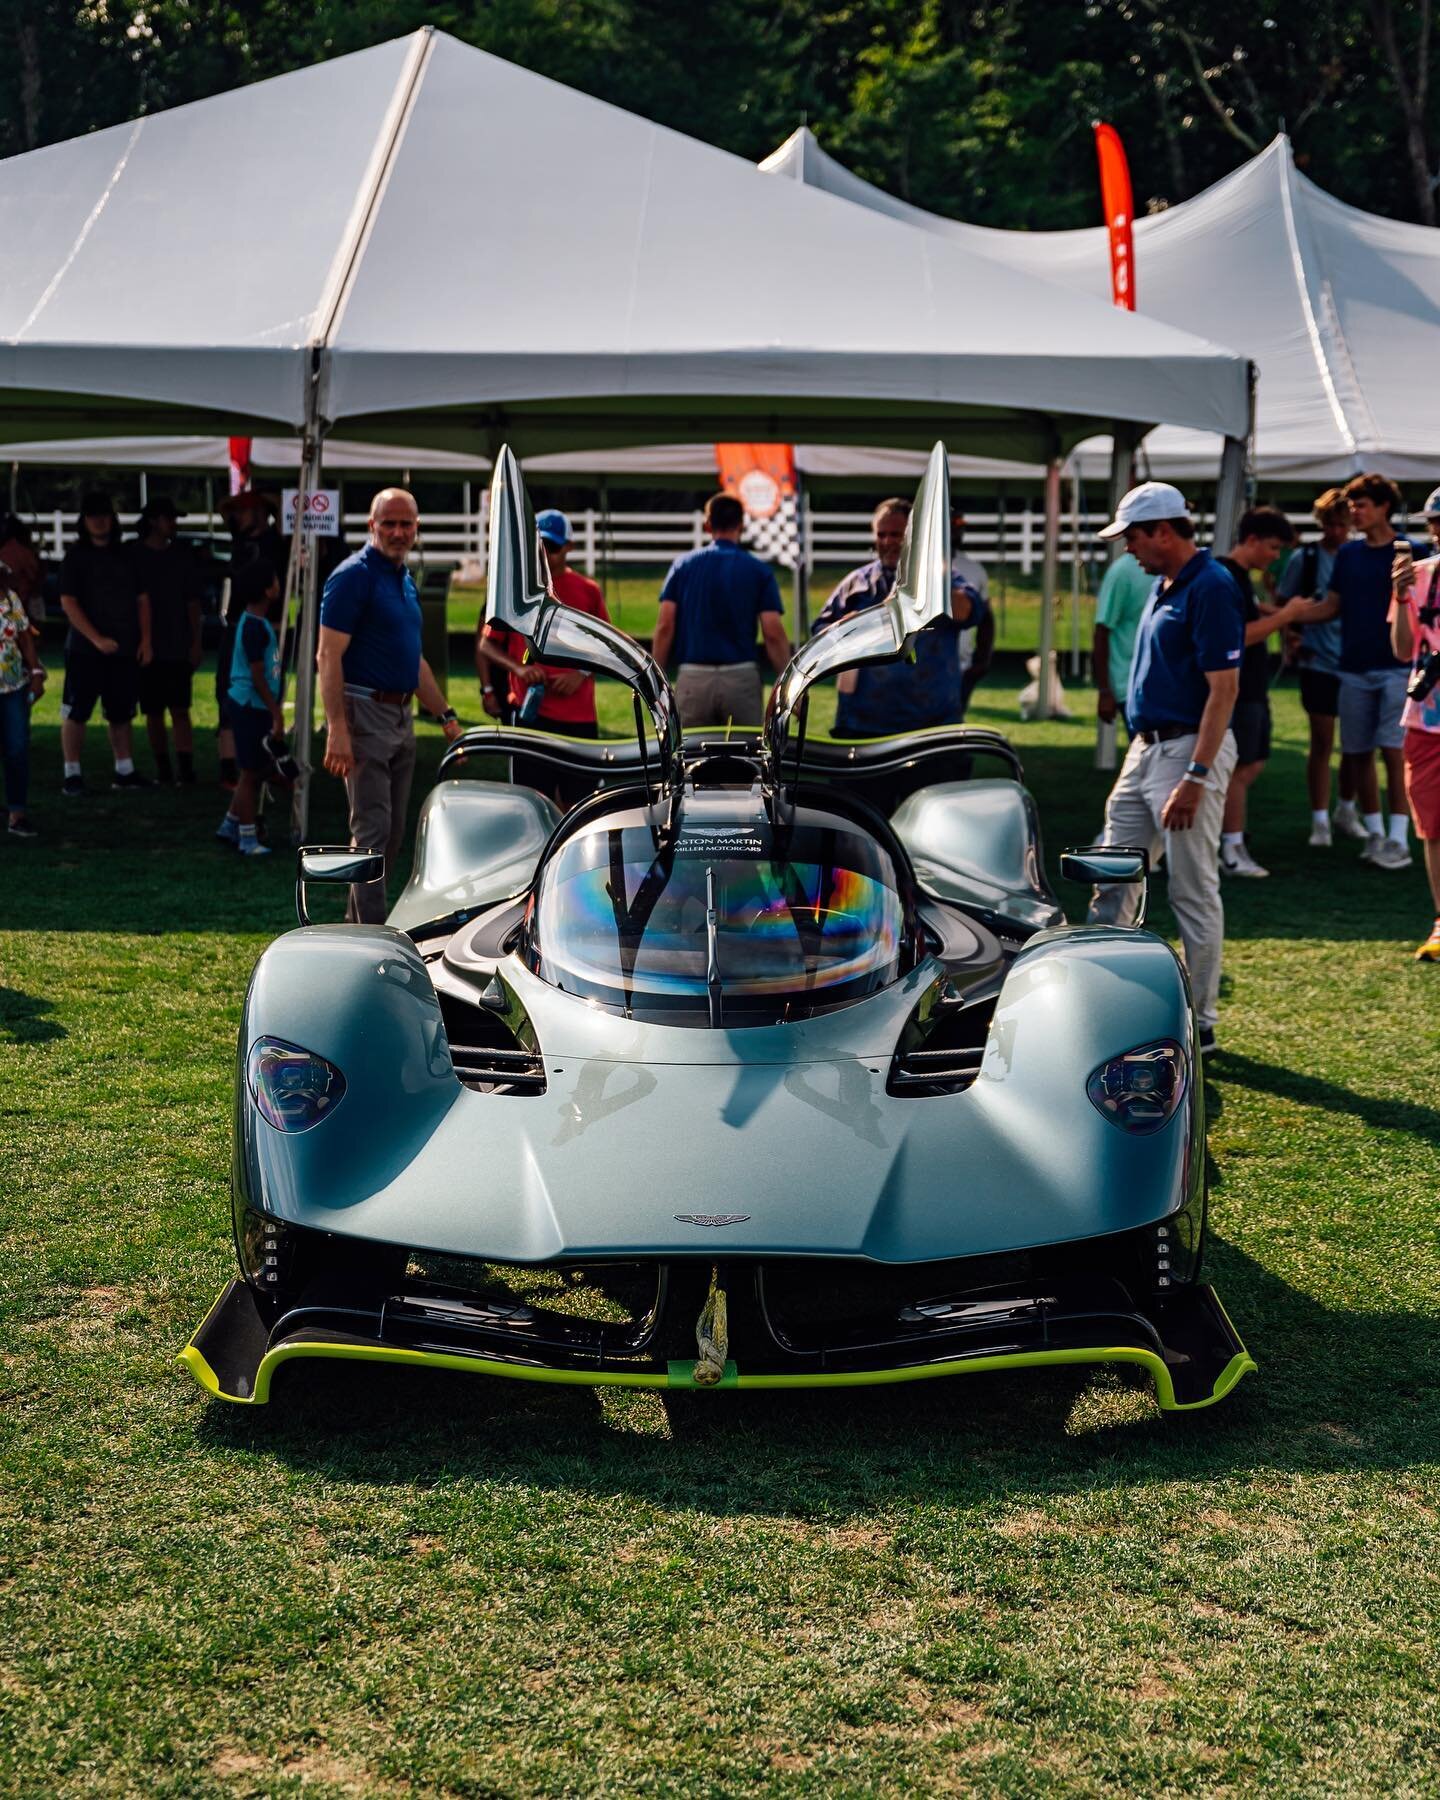 Loading a Valkyrie in front of a crowd&hellip; 😅🤣😳
#astonmartin #valkyrie